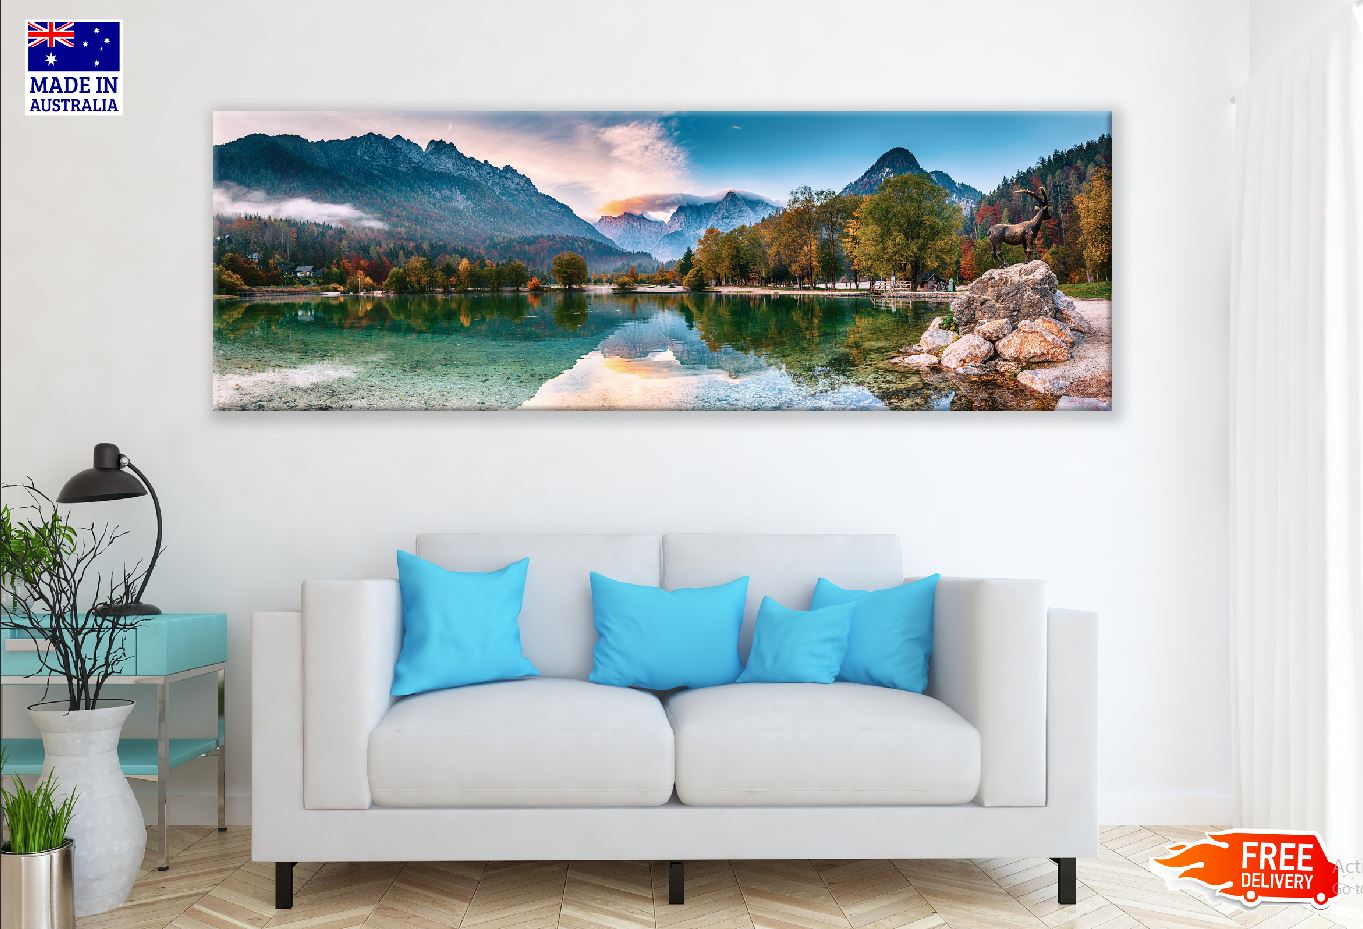 Panoramic Canvas Triglav Park Scenery View Photograph High Quality 100% Australian Made Wall Canvas Print Ready to Hang